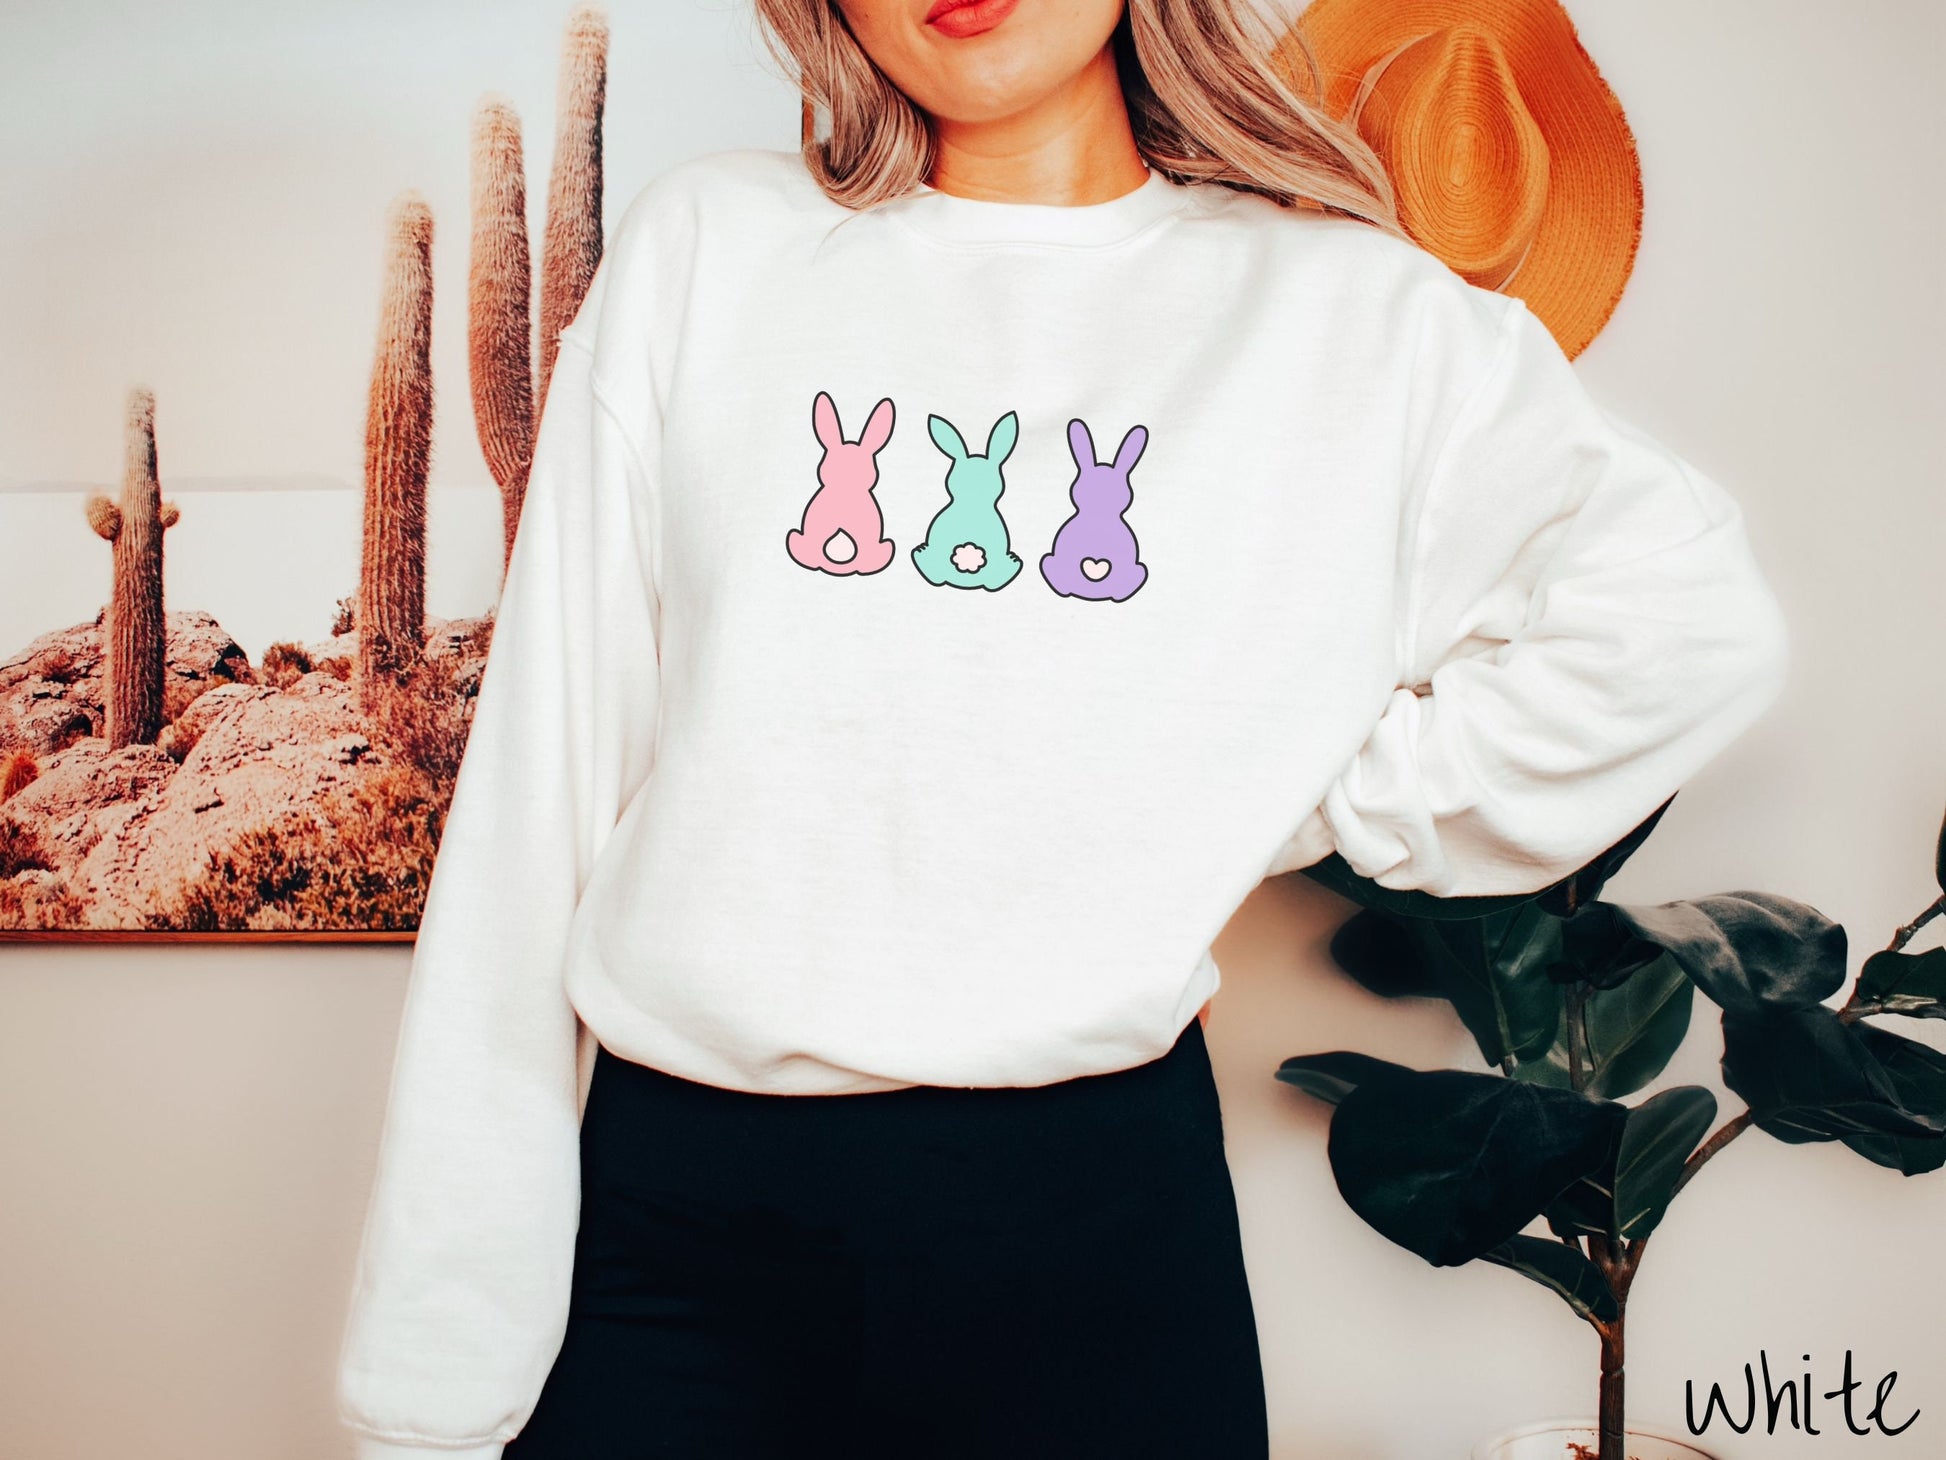 A woman wearing a cute, vintage white colored shirt with three colorful bunny rabbits sitting facing away. One is pink with a white tail, another bay with white tail, and the third is purple with a white, heart-shaped tail.